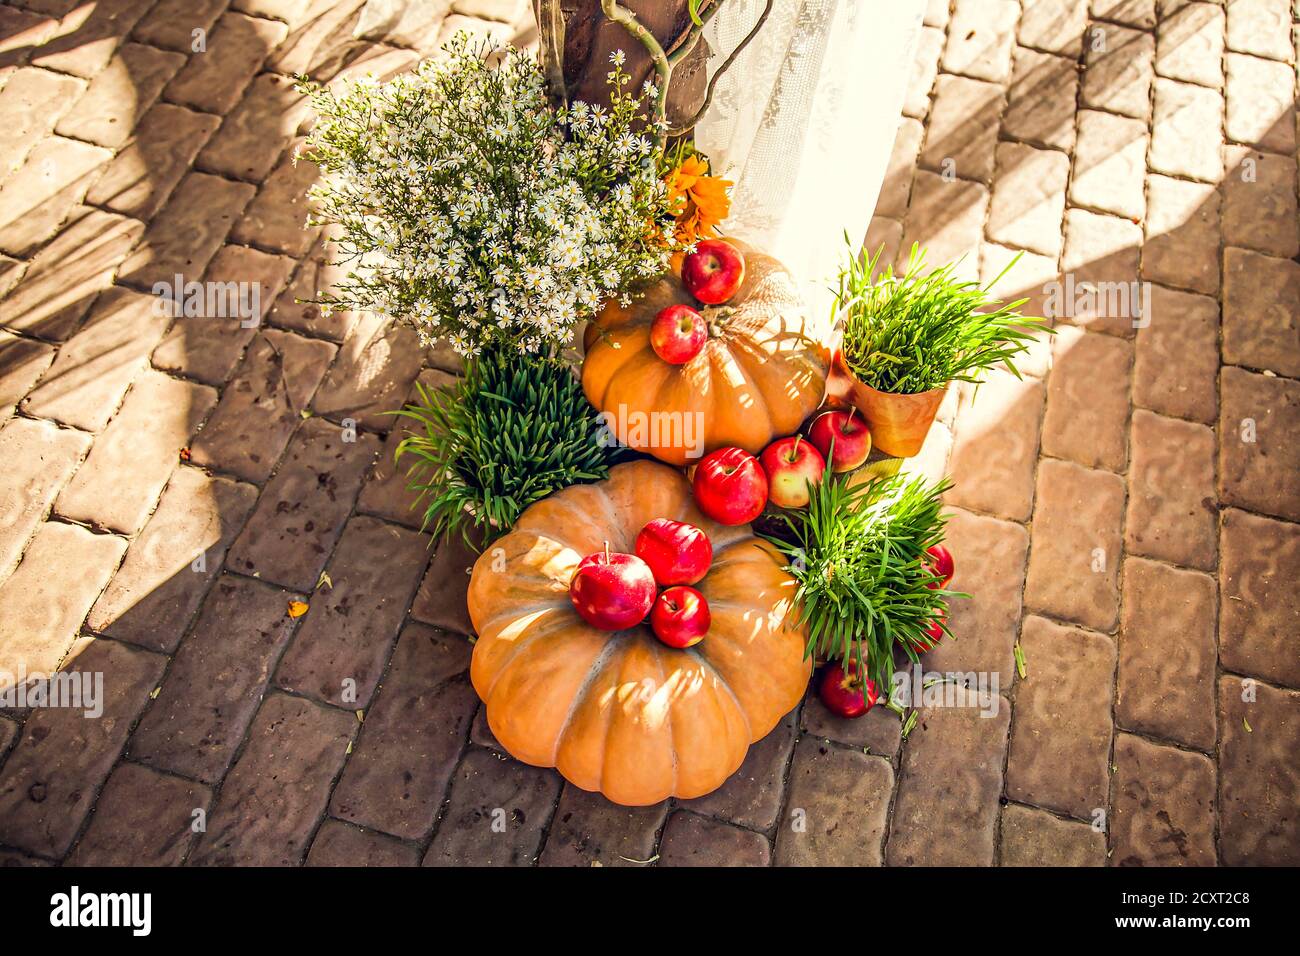 Wedding arch for off-site wedding ceremony, decorated in autumn theme with pumpkins. Stock Photo